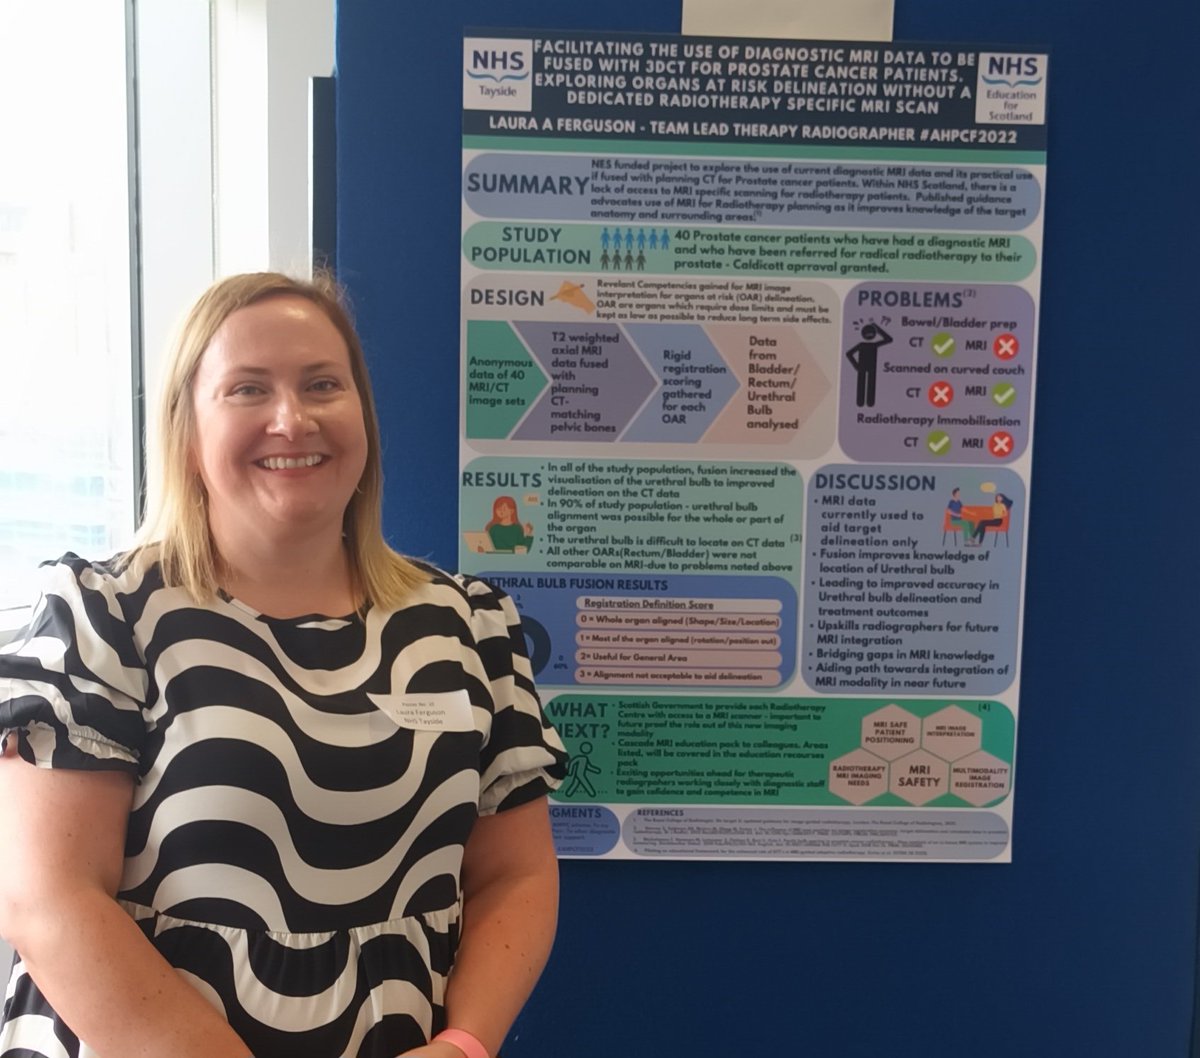 Celebrating the fabulous @lberguson who was a NES AHP careers fellow.  More to come regarding Laura's project on @TAYRadiotherapy over the coming days. @NHSTayside @NESnmahp @nic_ahp #AHPCF2022 #TherapeuticRadiographer #AHP